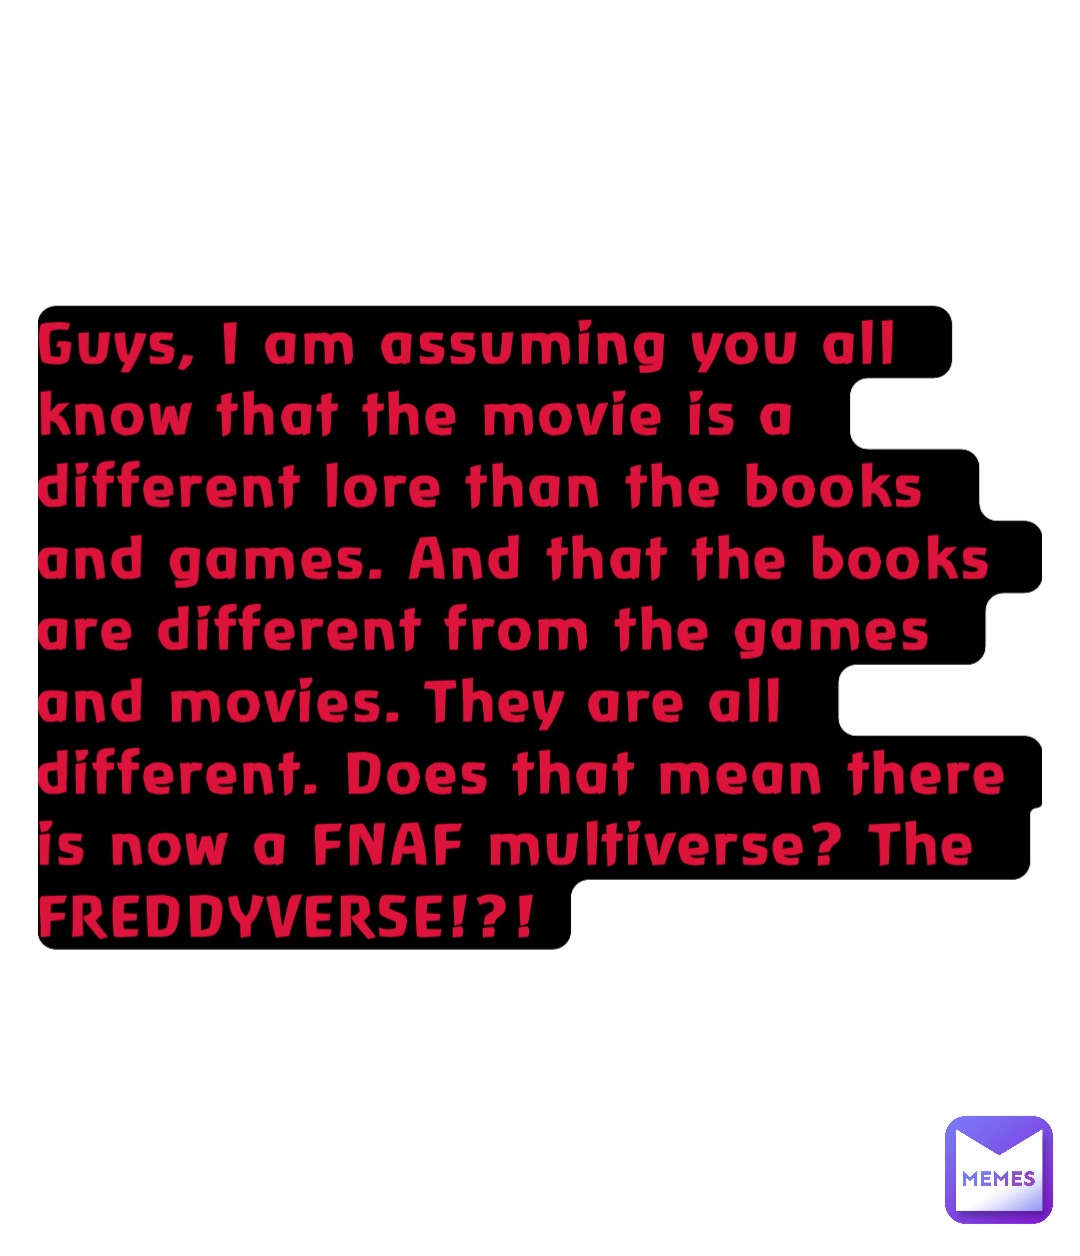 Guys, I am assuming you all know that the movie is a different lore than the books and games. And that the books are different from the games and movies. They are all different. Does that mean there is now a FNAF multiverse? The FREDDYVERSE!?!